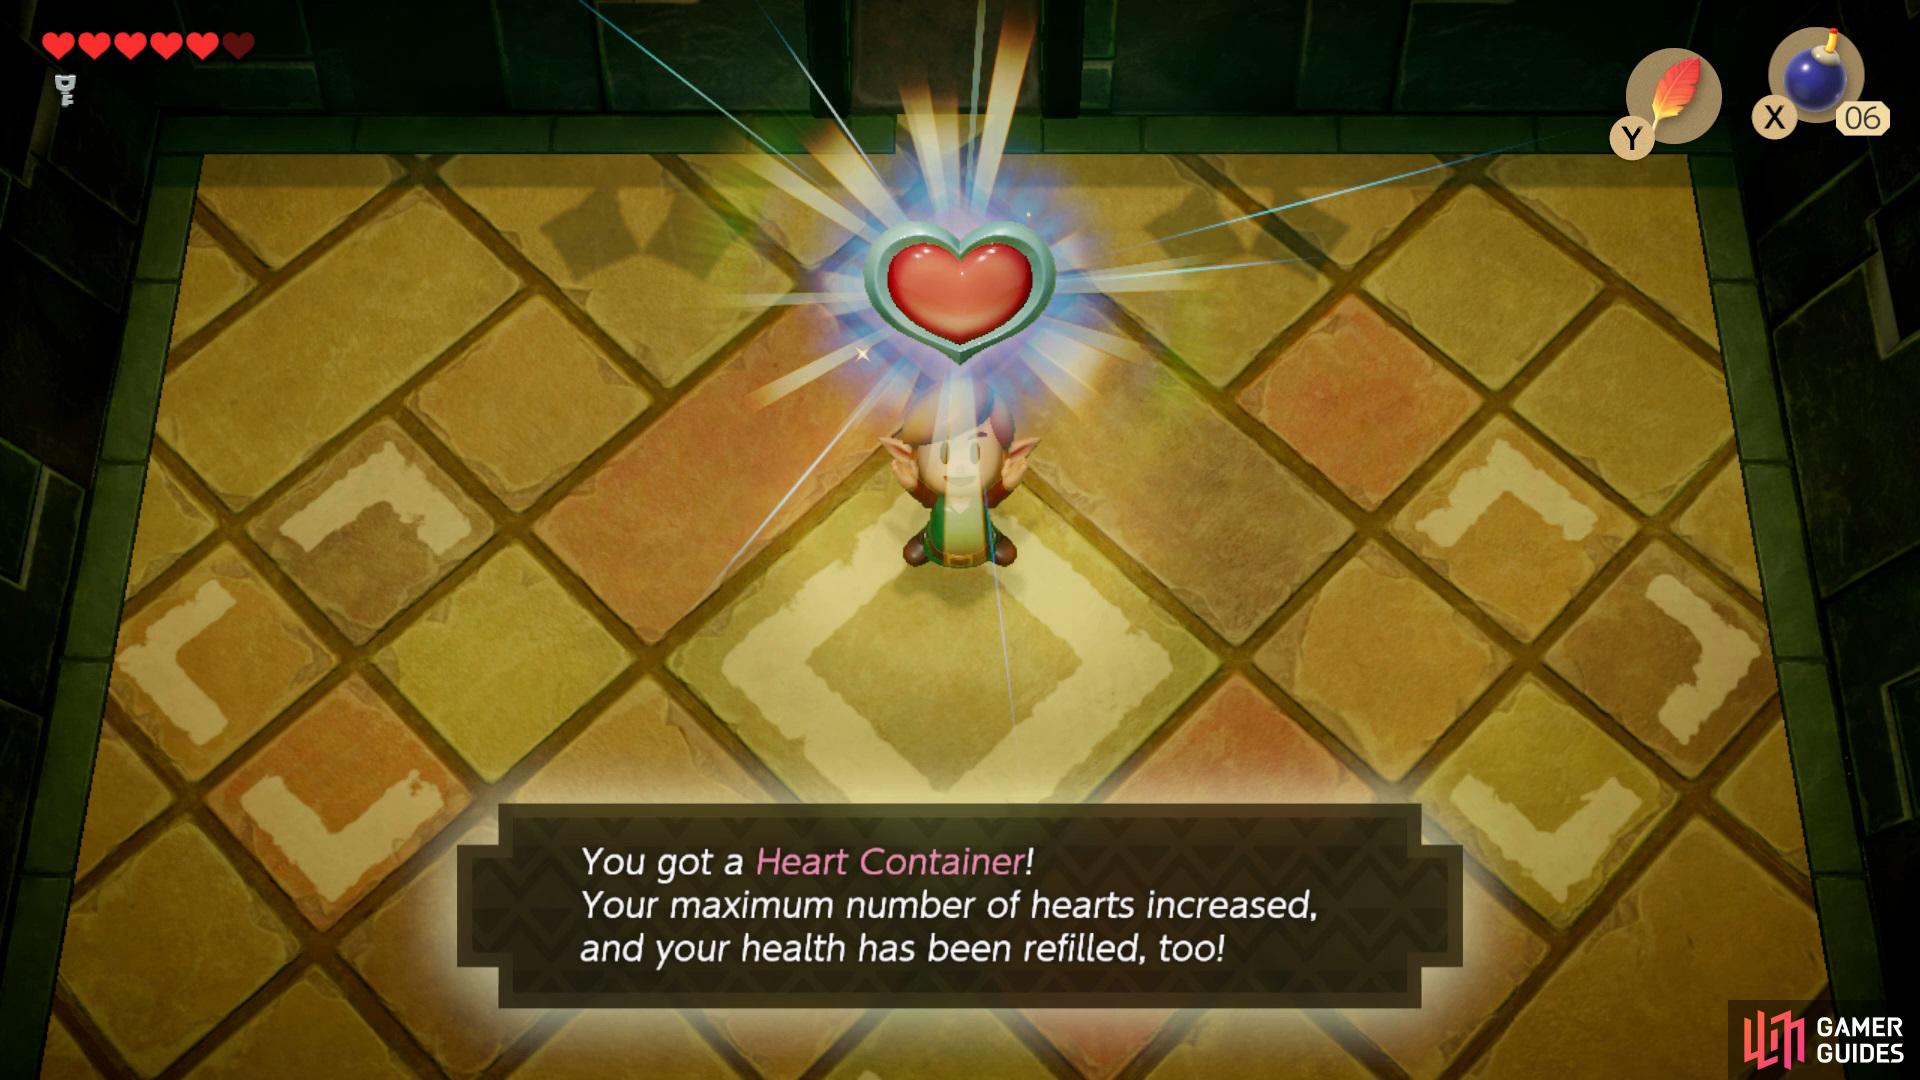 then collect your Heart Container.